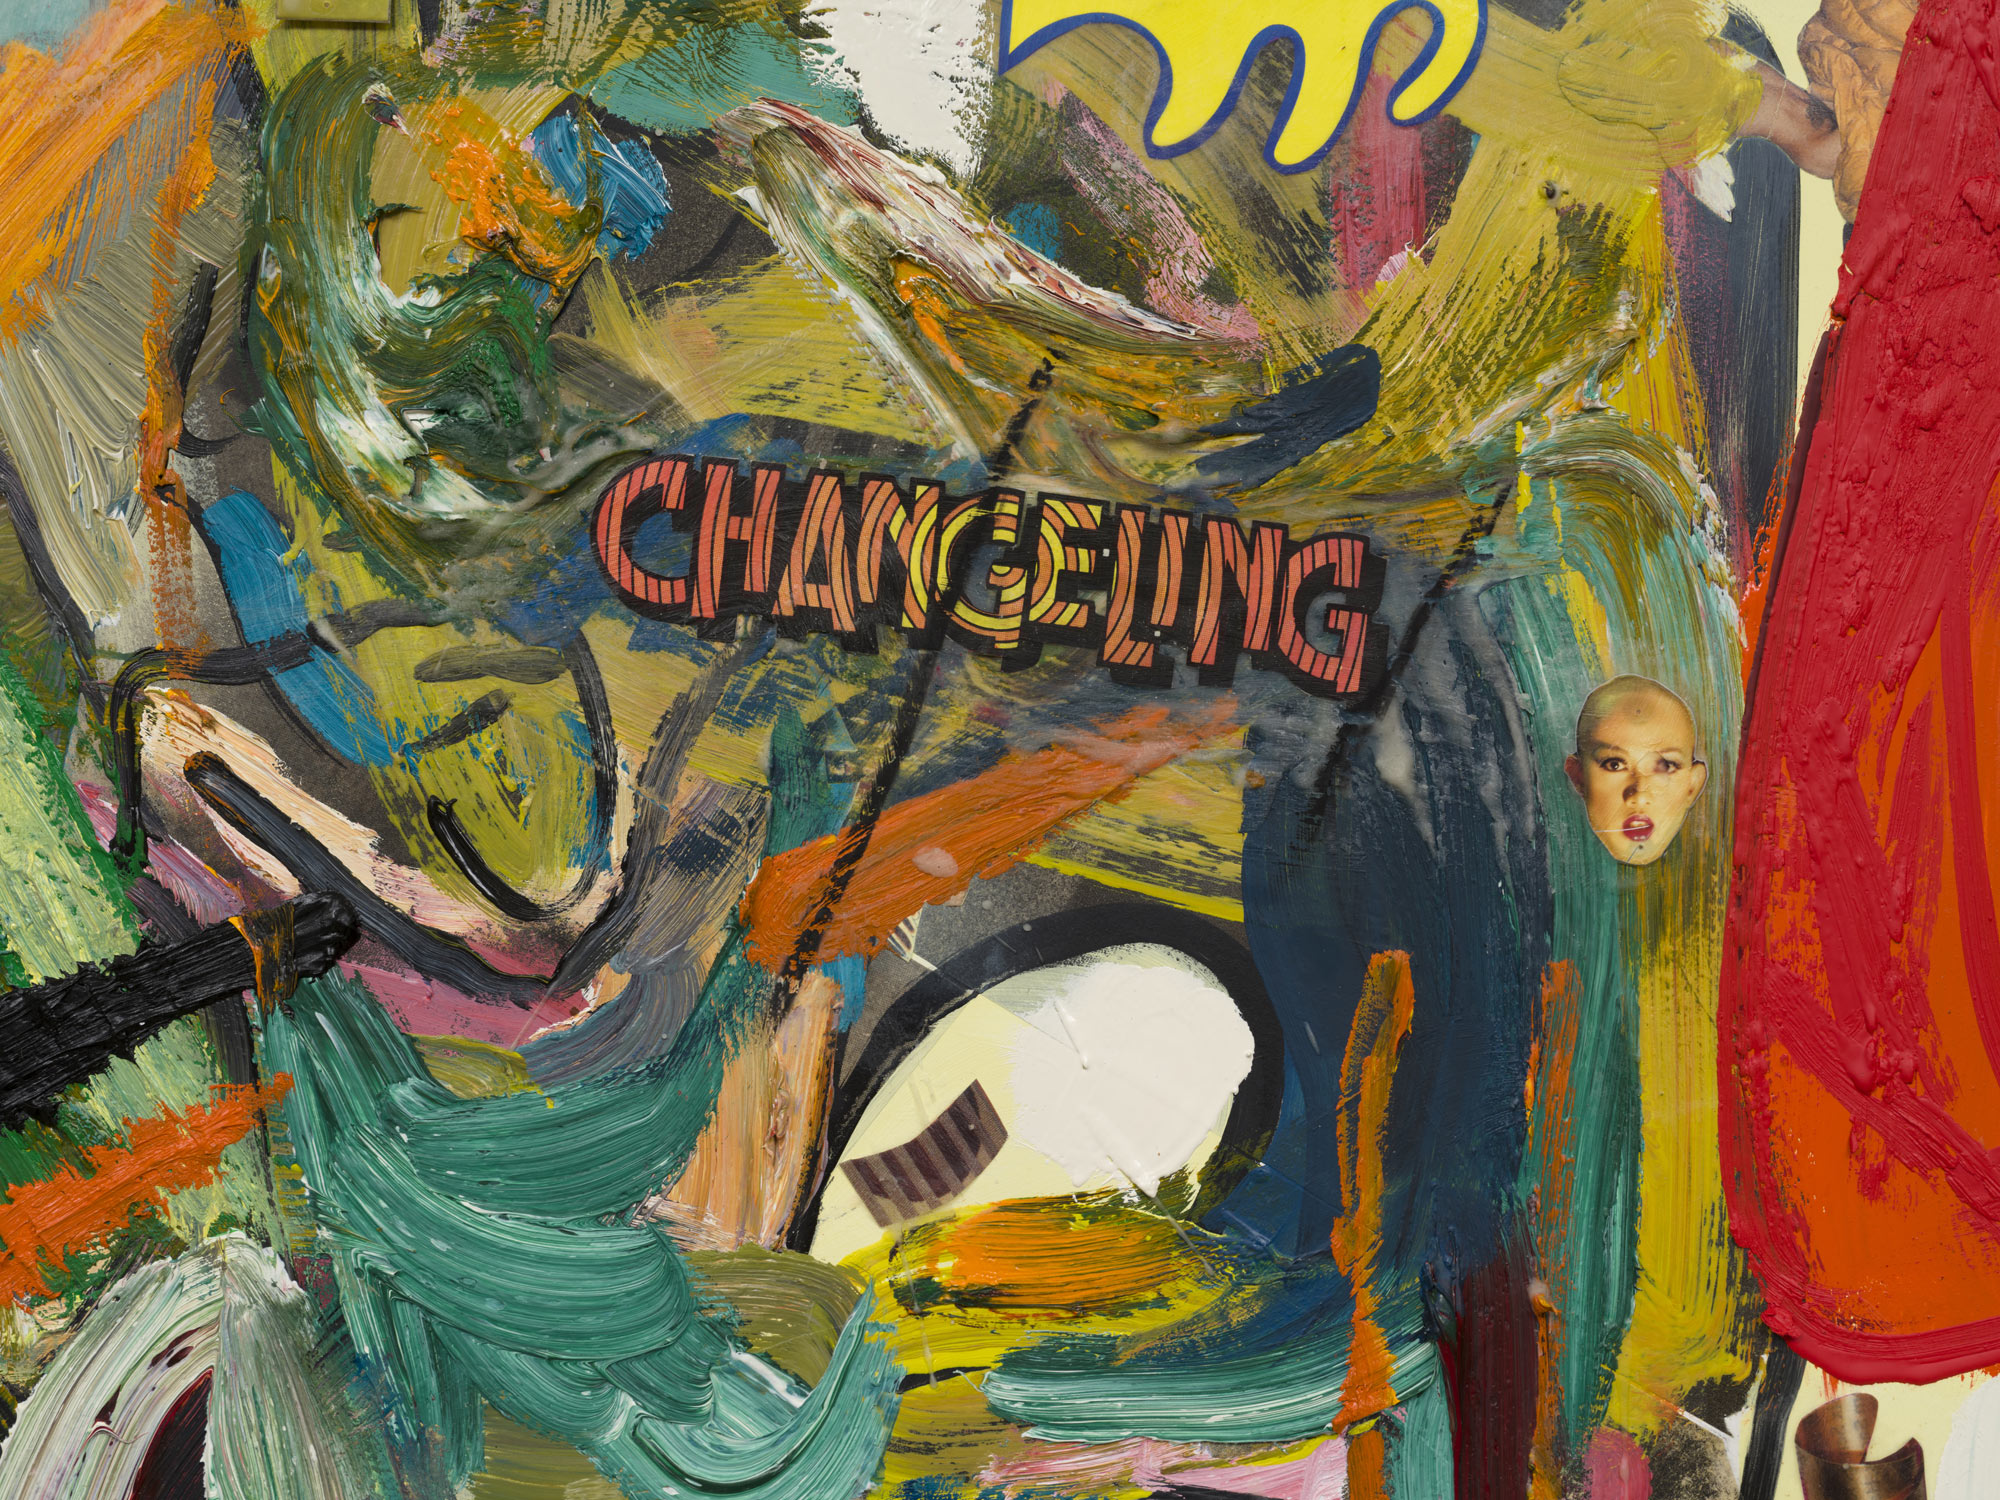 Elliott Hundley<br> Changeling, 2020<br> oil, encaustic, photographs and collage on linen<br> 80 x 96 x 2 1/4 in. (203.2 x 243.8 x 5.7 cm)<br> $125,000.00